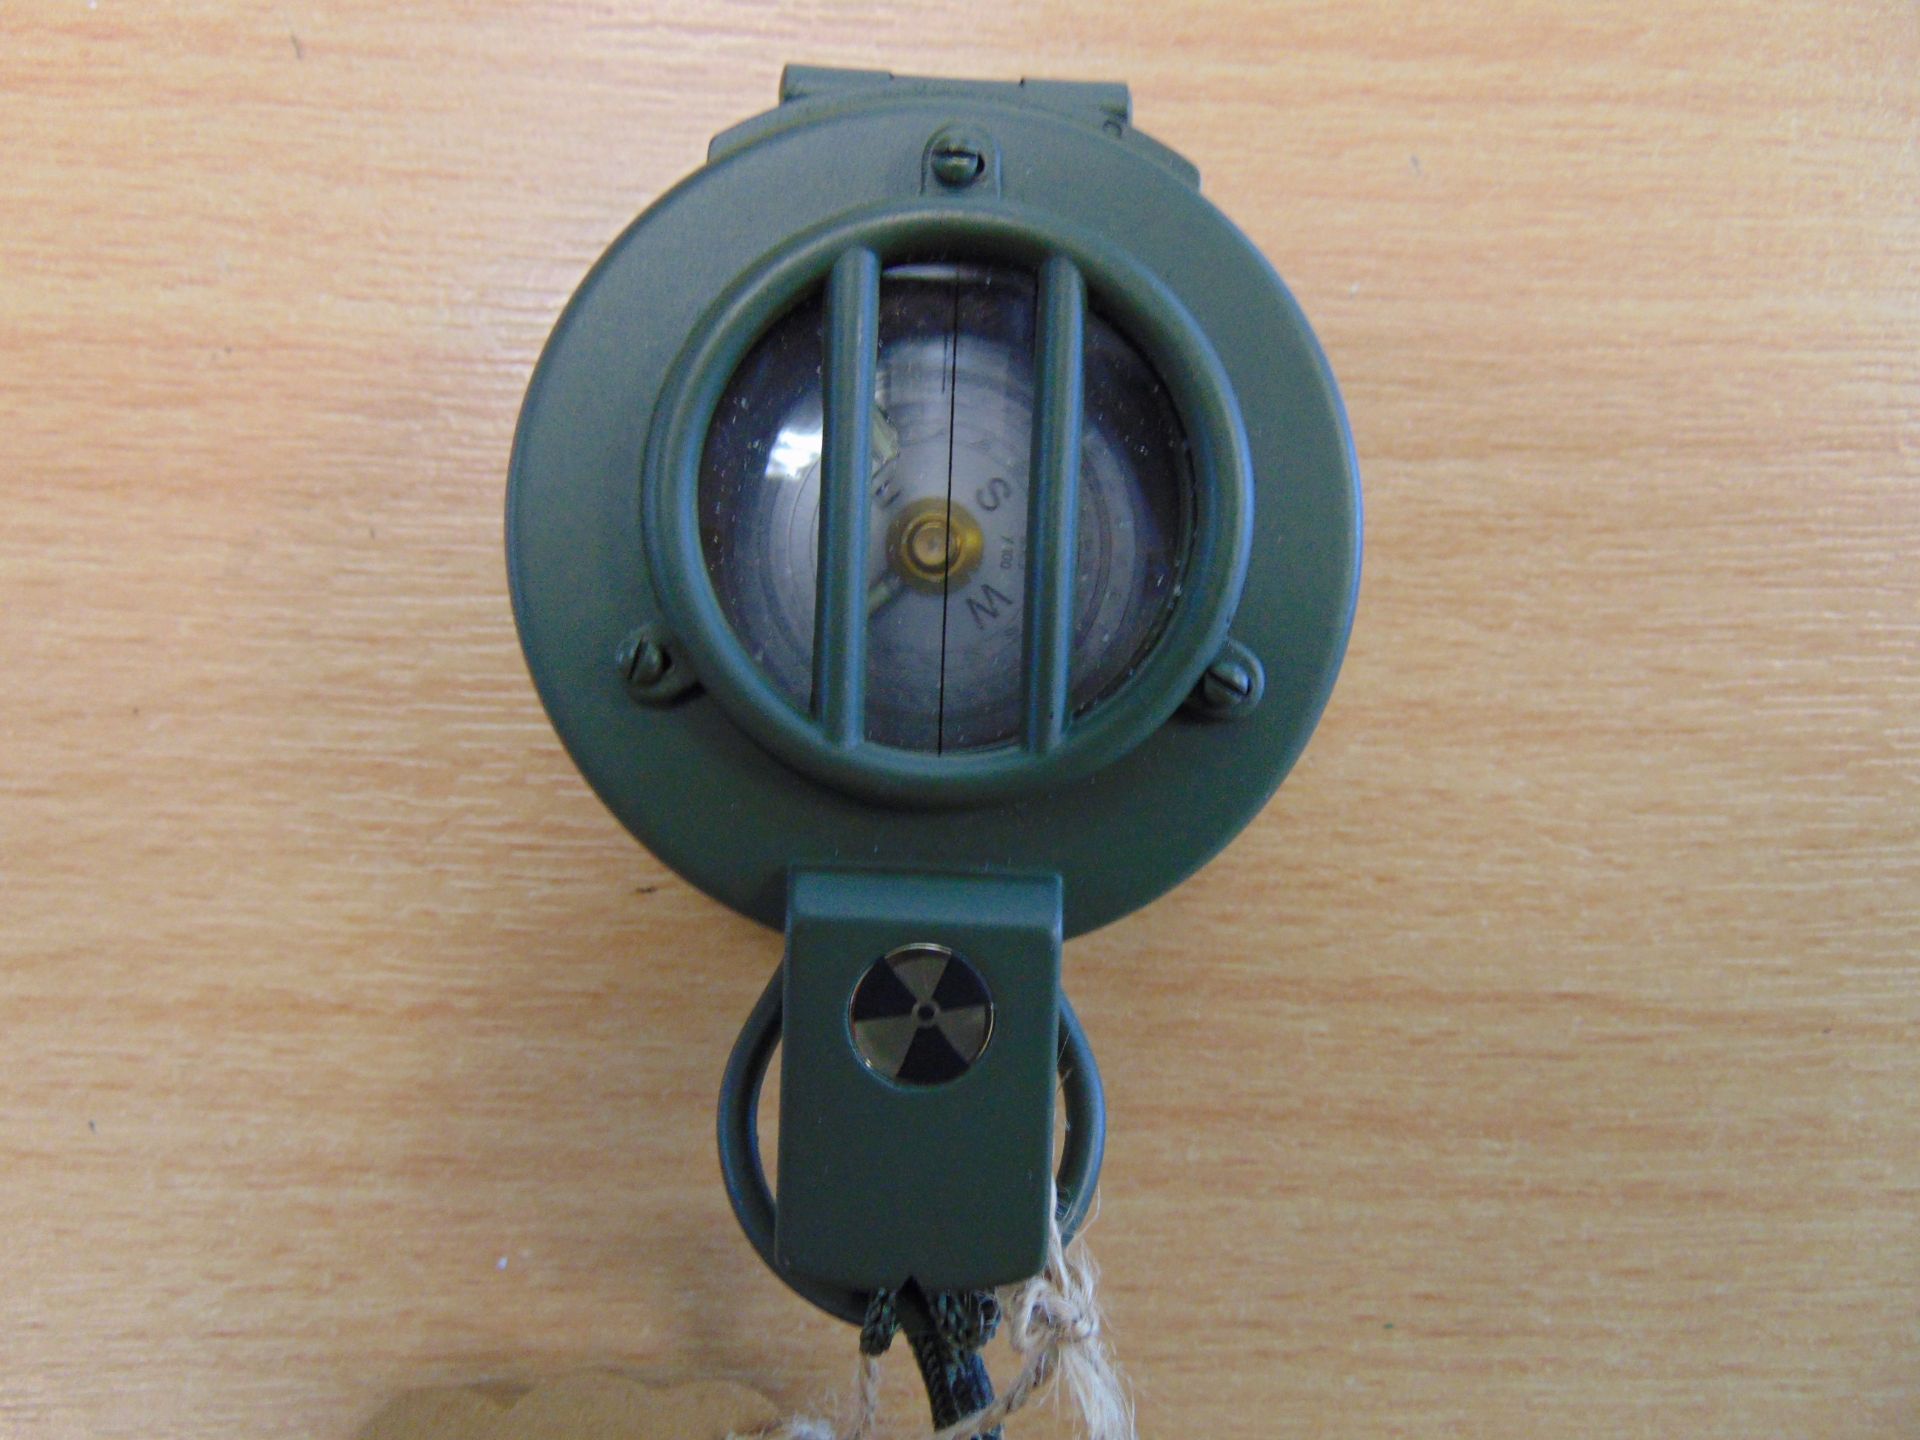 New Unissued Francis Barker M88 British Army Compass - Image 2 of 4